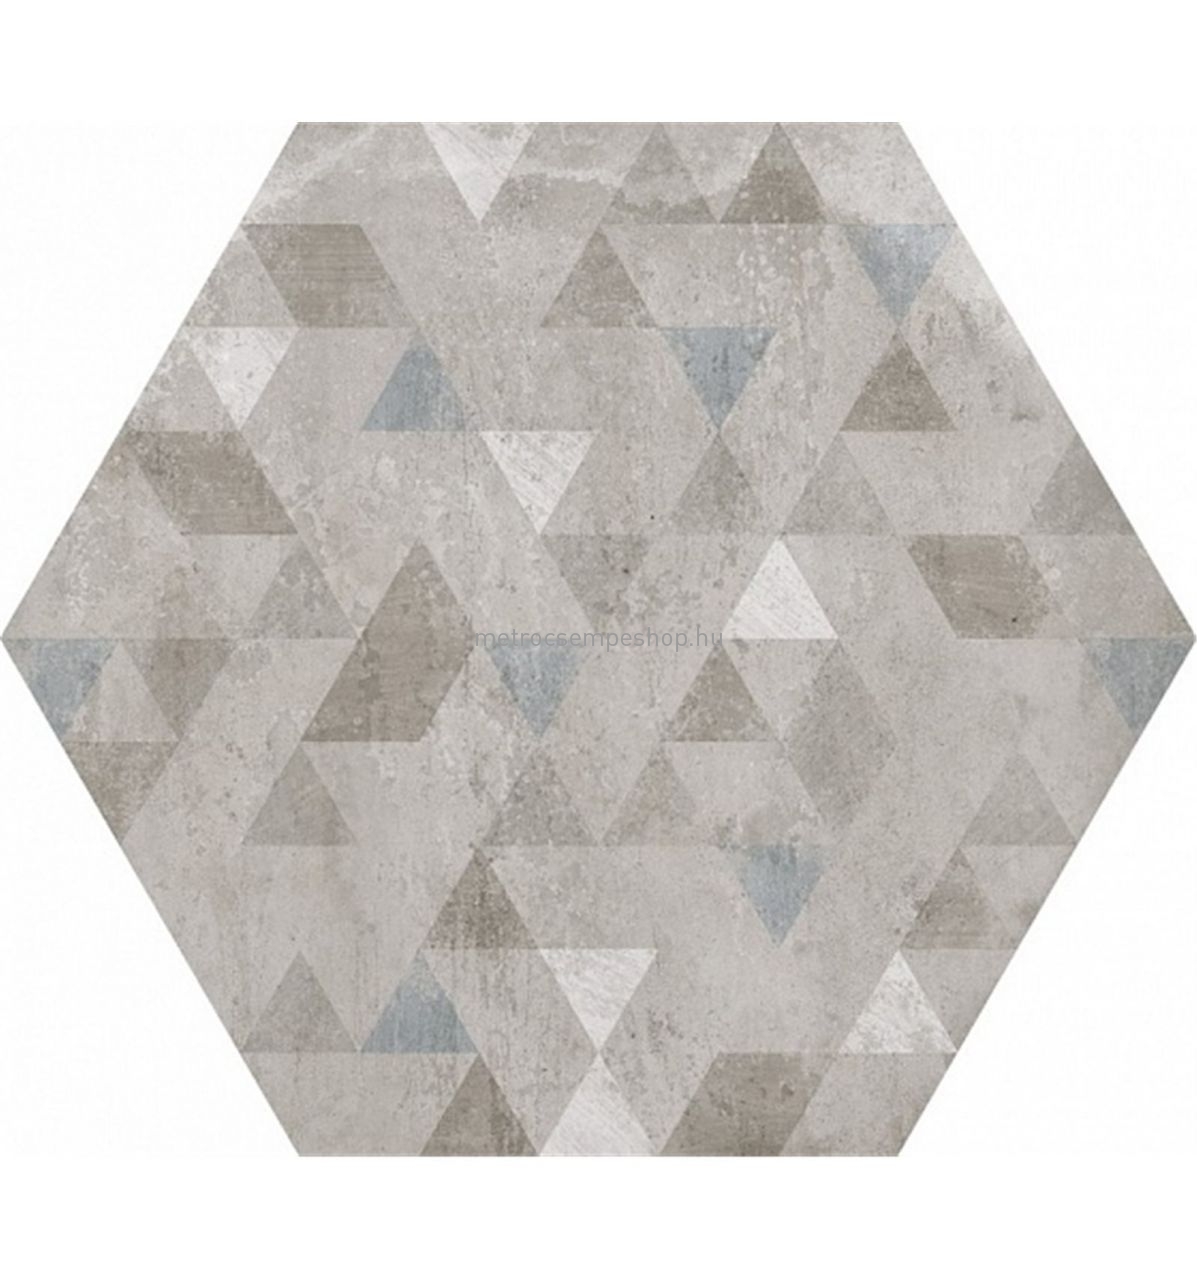 29,2x25,4 EQUIPE URBAN FOREST SILVER HEXATILE